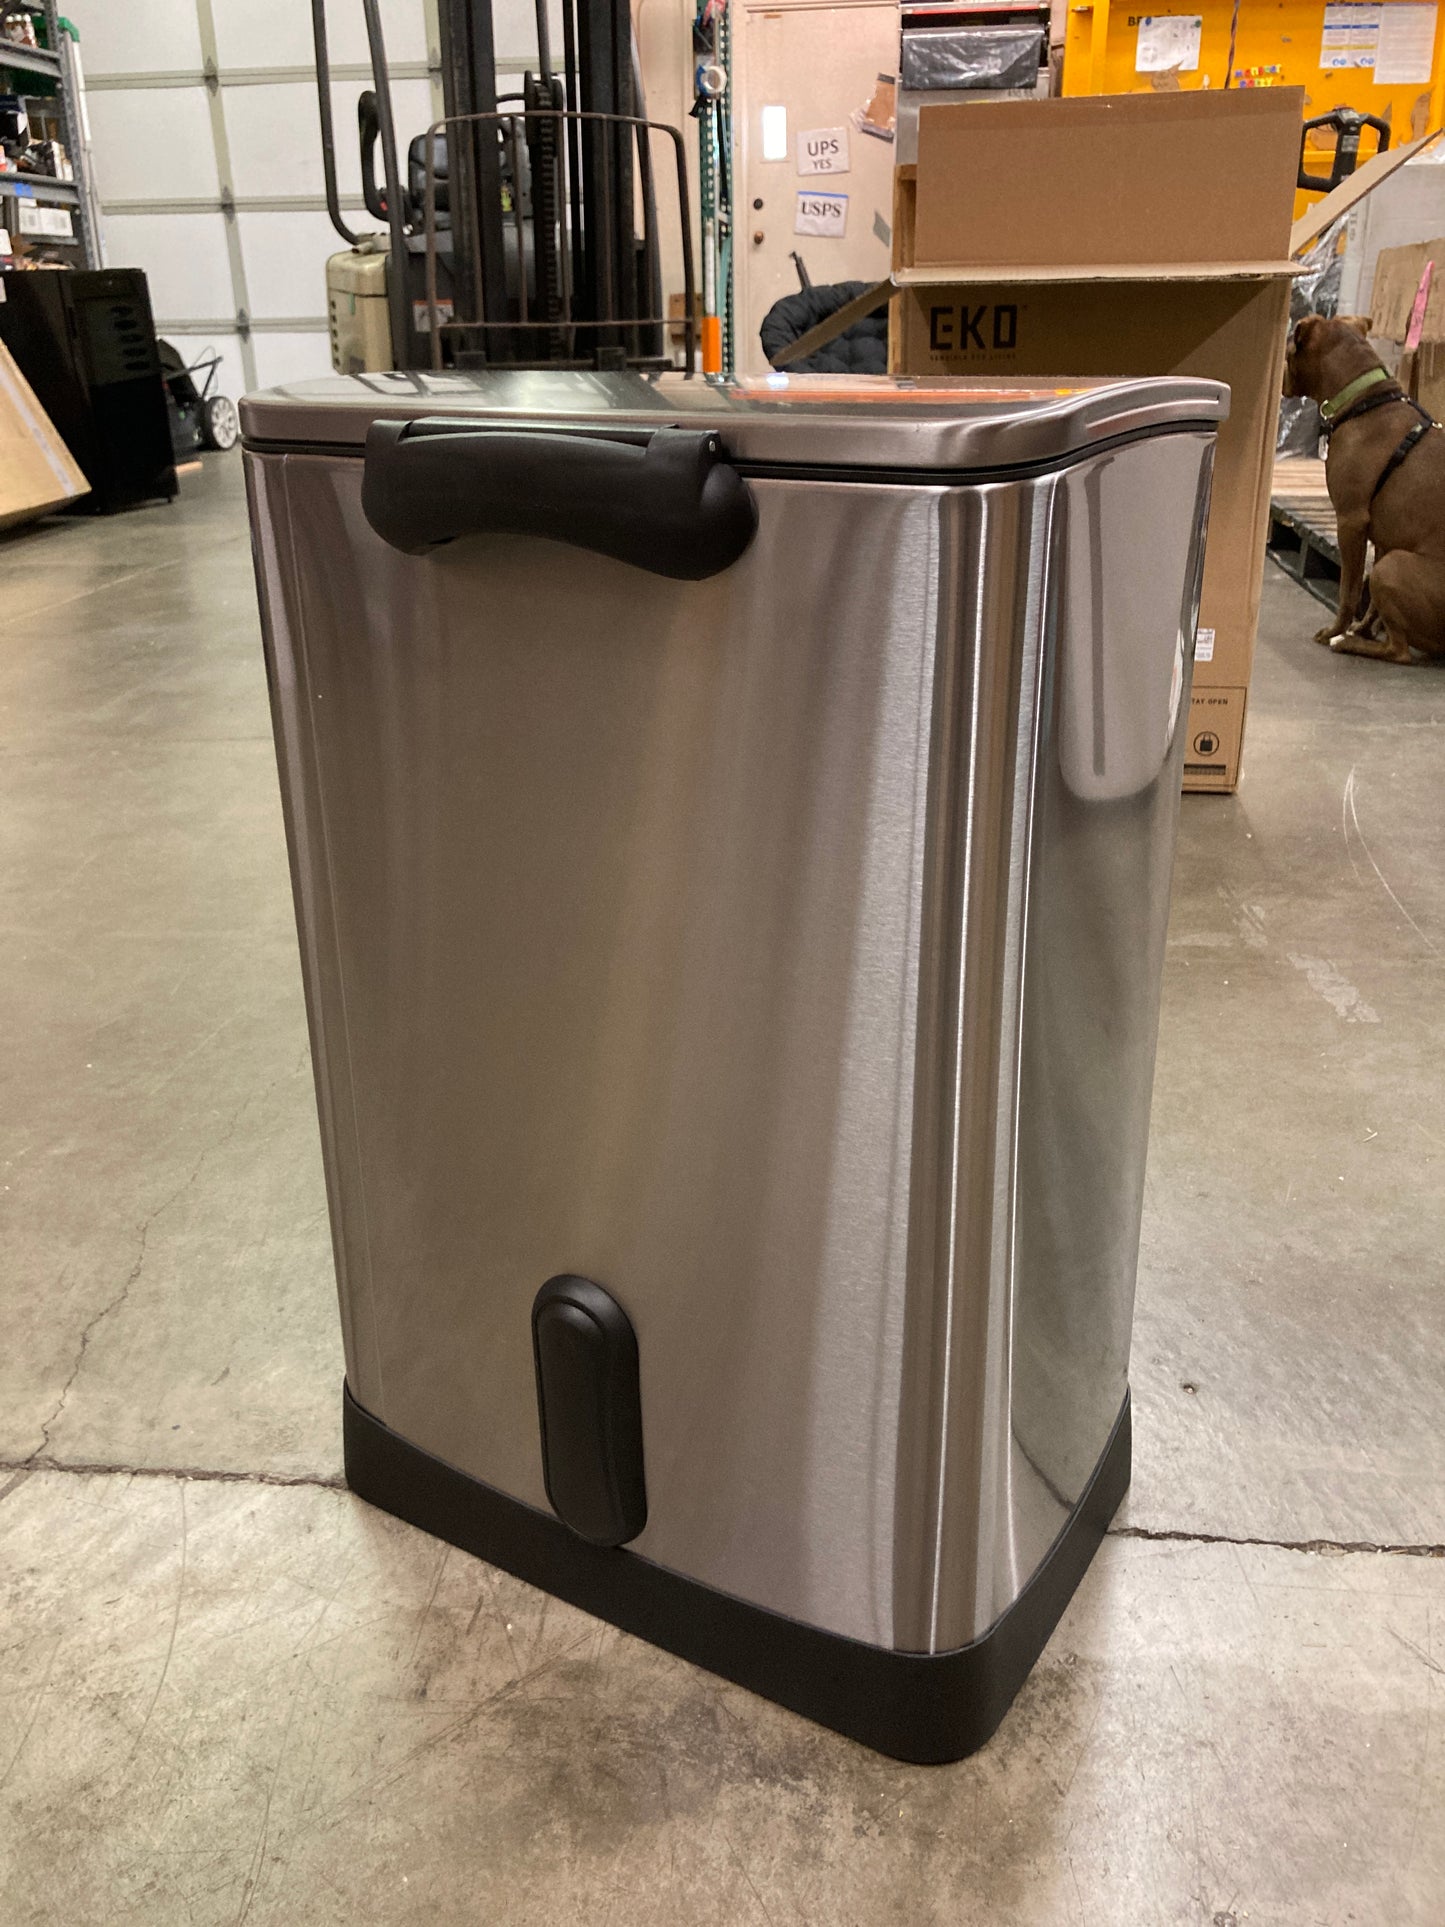 Costco - Neocube 50 Liter Dual Compartment 28 Liter and 18 Liter Stainless Steel Recycle and Trash Bin - Retail $99